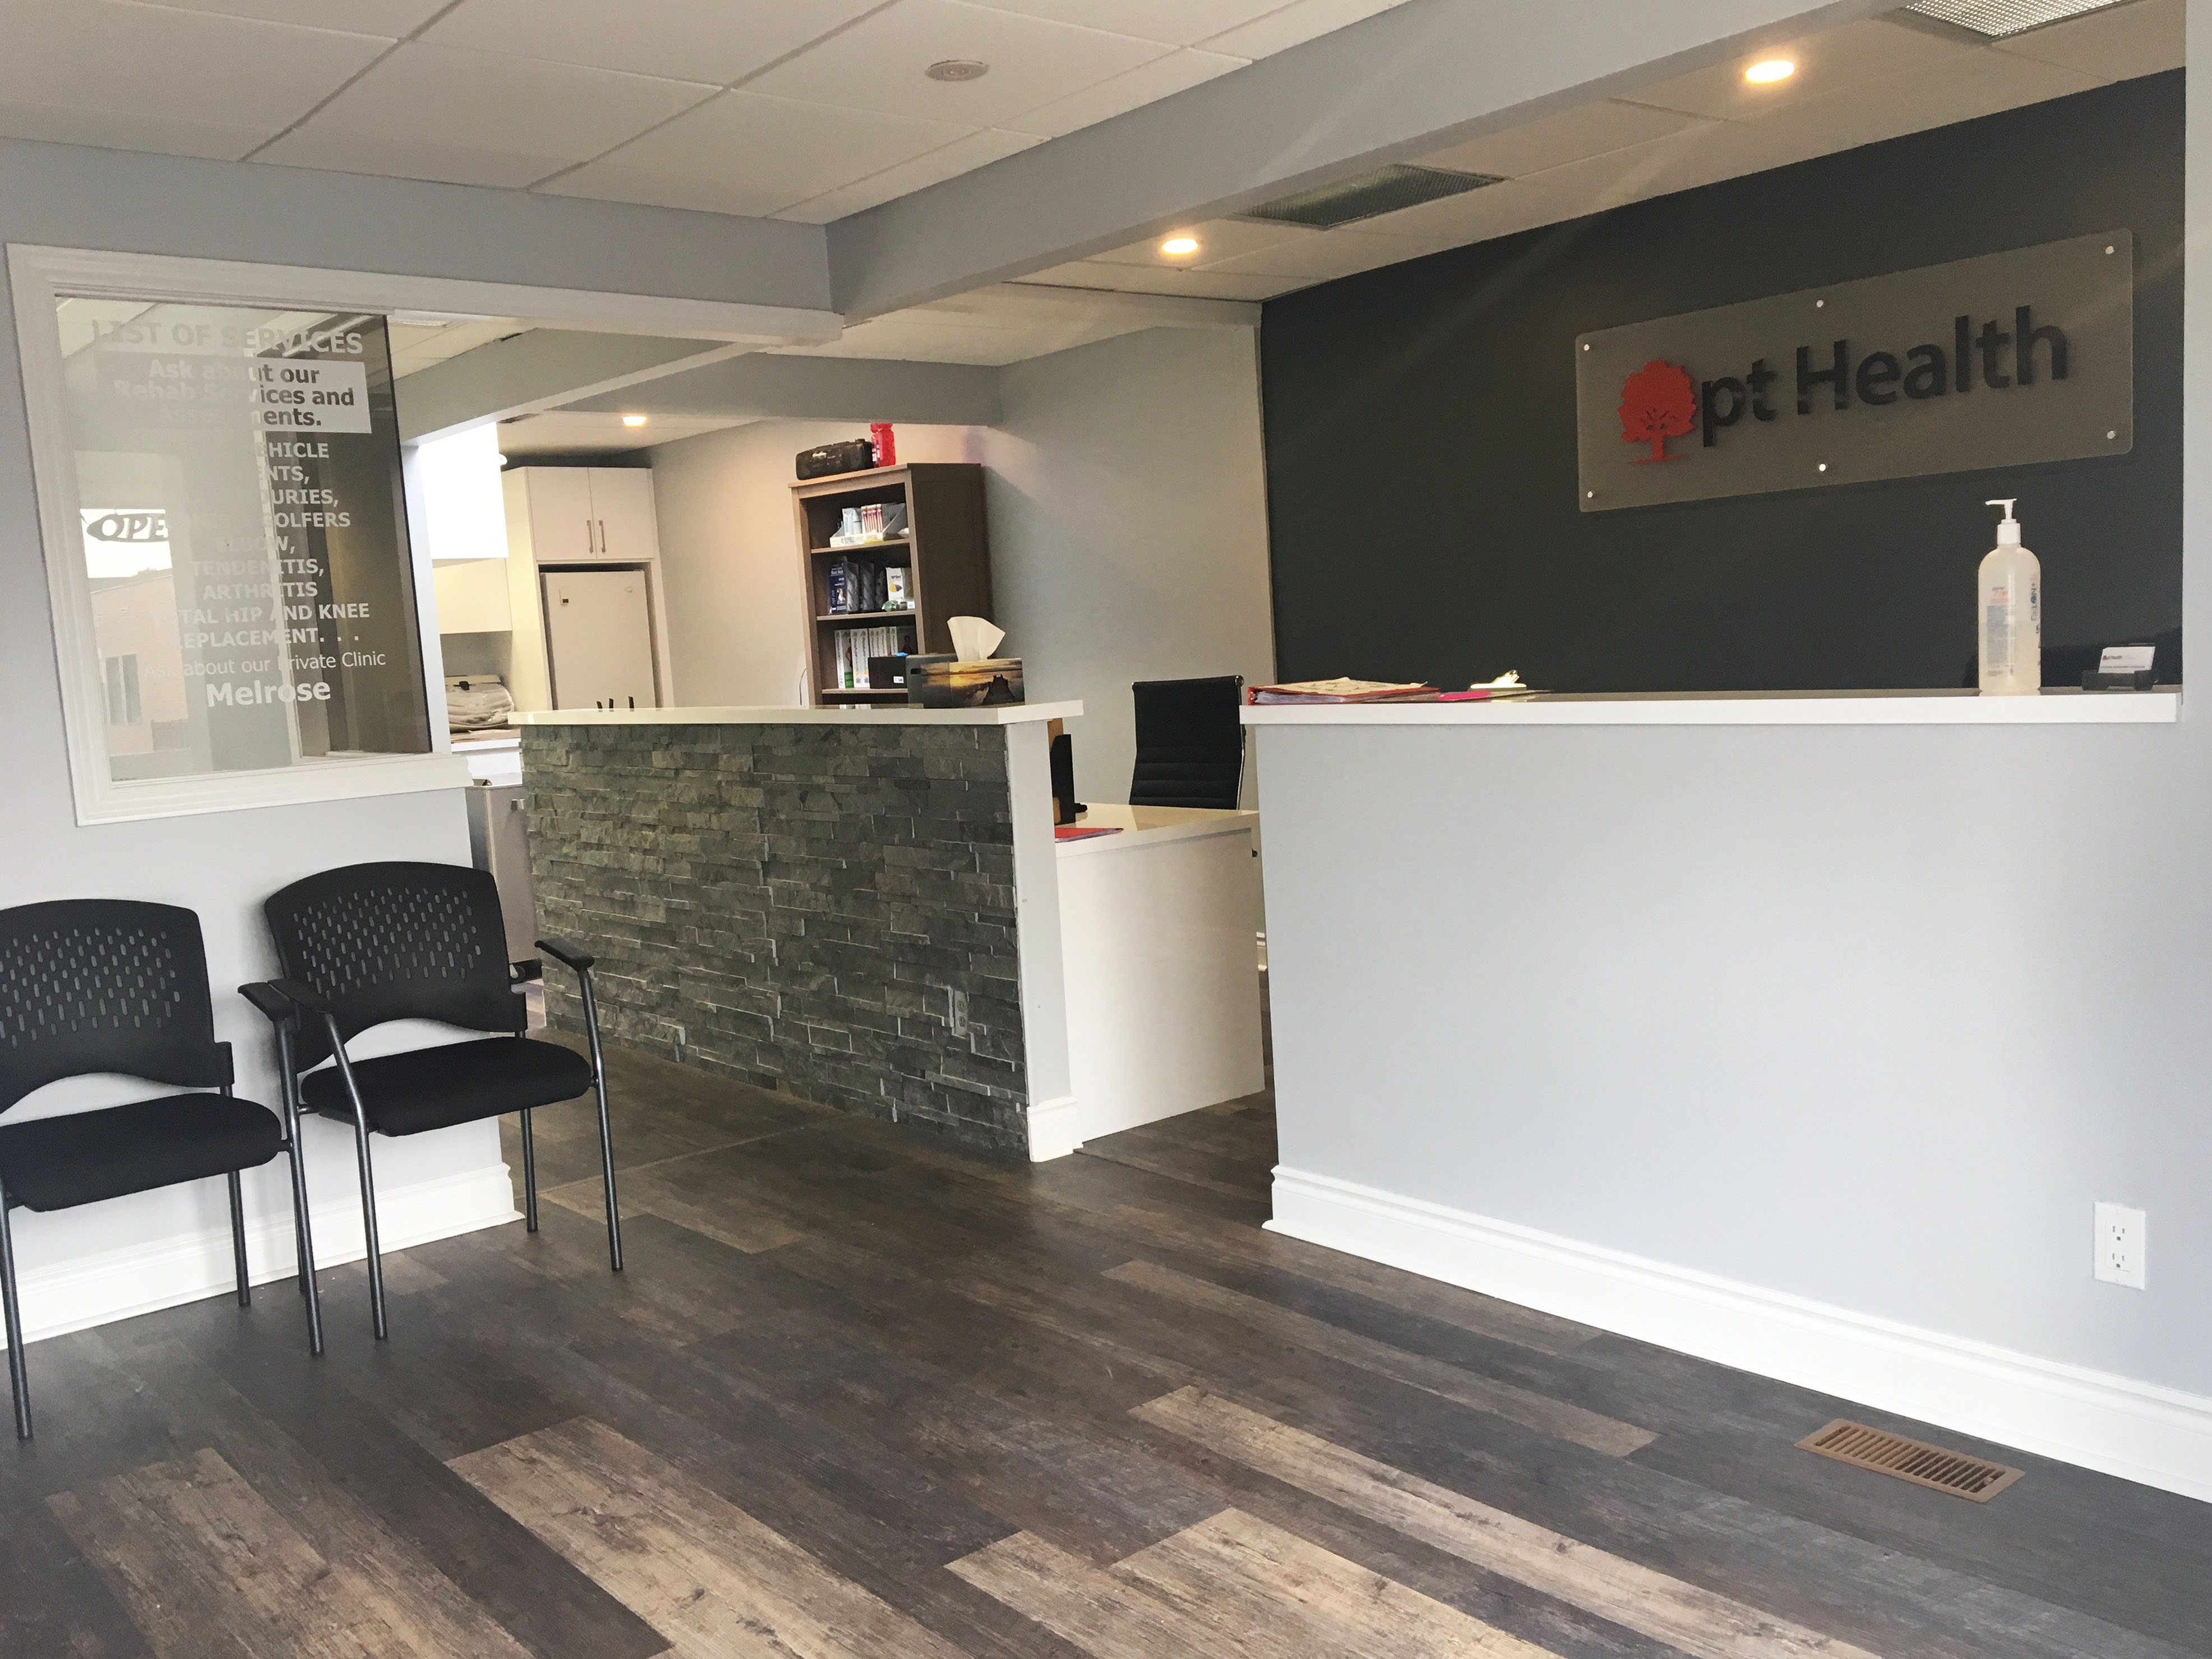 Photograph of Melrose Physiotherapy pt Health's reception desk